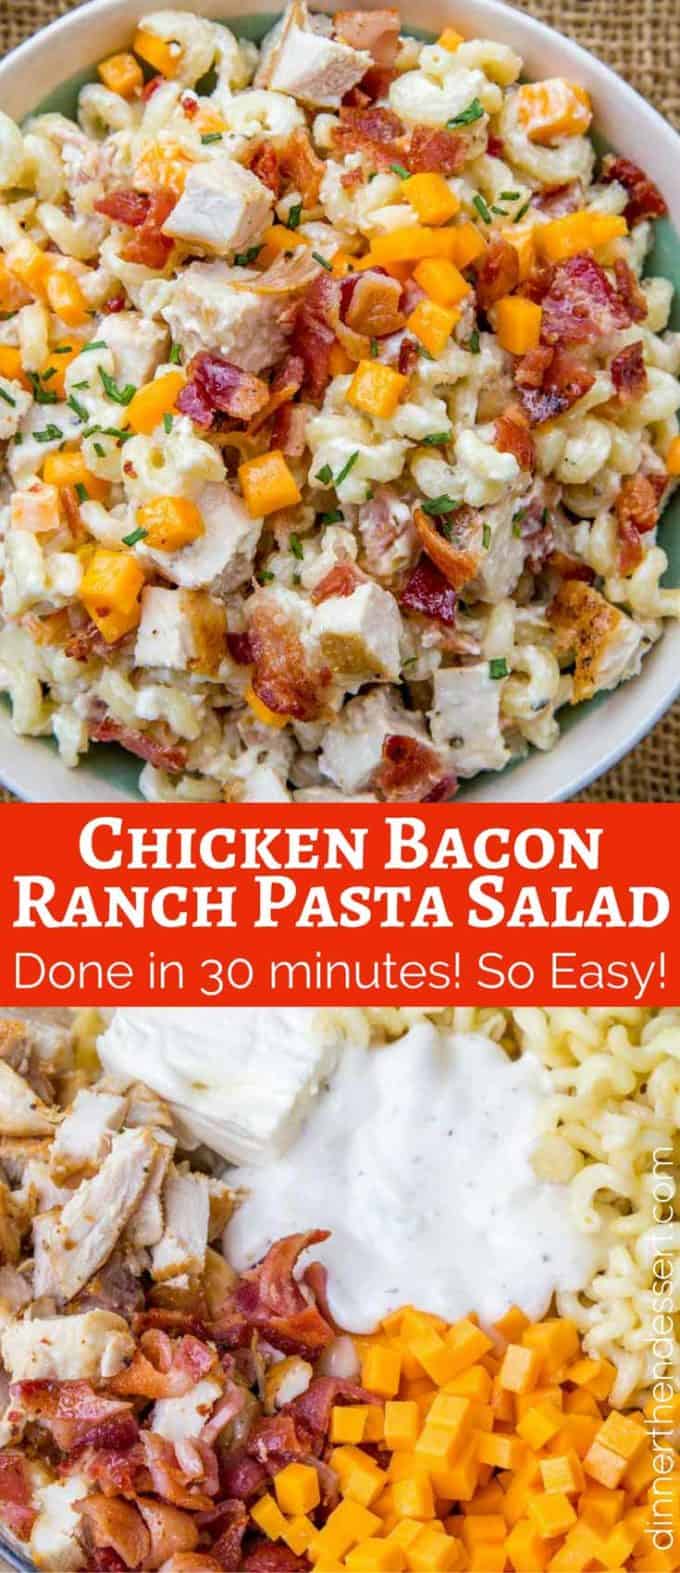 We love this Chicken Bacon Ranch Pasta Salad so much we've made it twice this week!